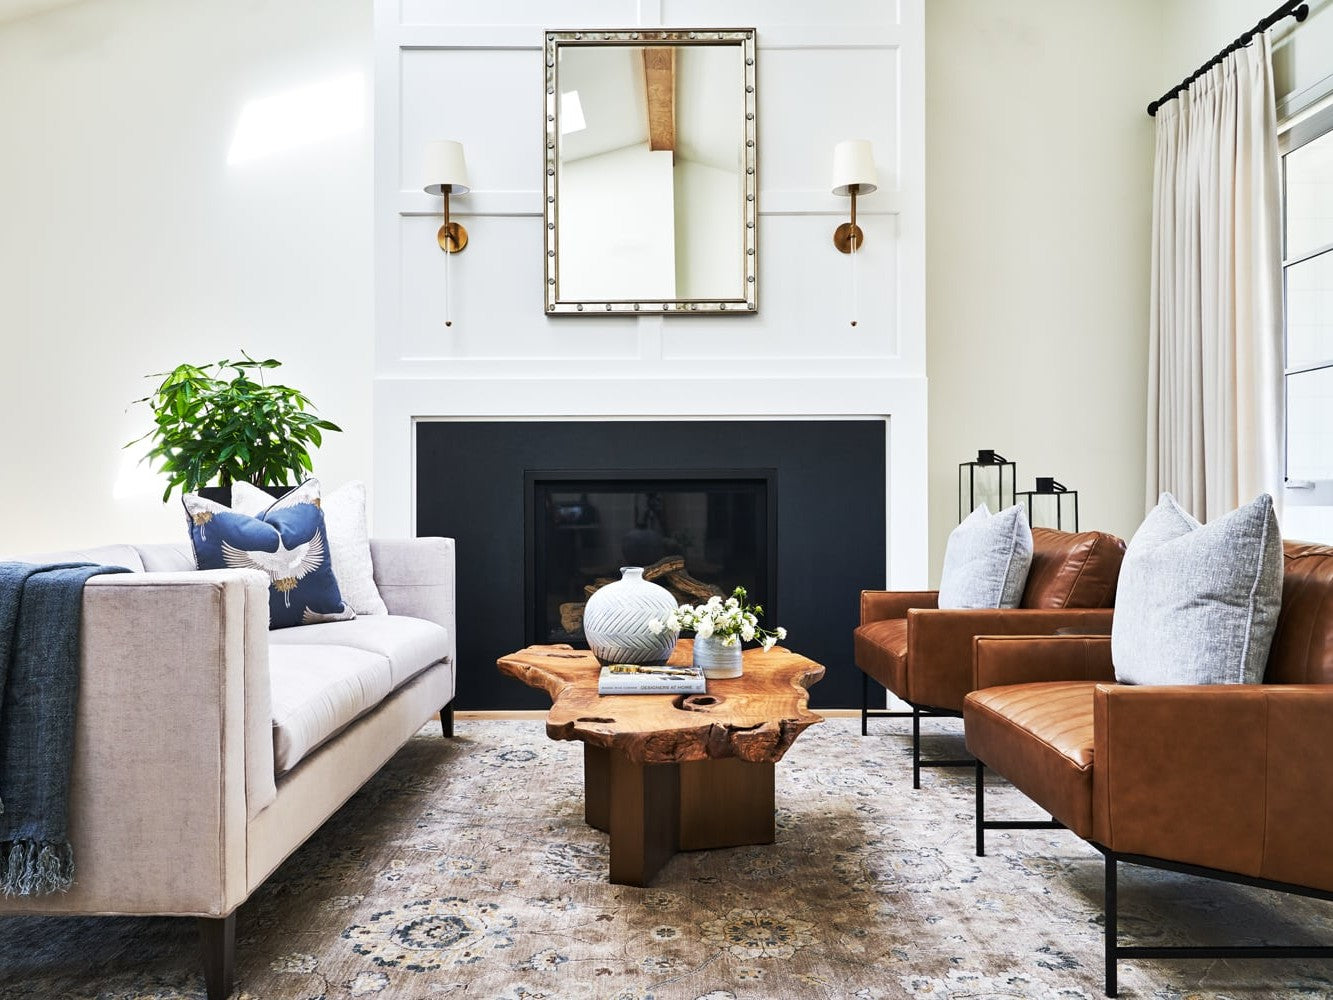 A modern living room features a white sofa with blue and white pillows on the left, facing two brown leather armchairs with gray pillows on the right. A wooden coffee table with decorative items is centered on a patterned rug. A mirror and wall sconces are above a fireplace.